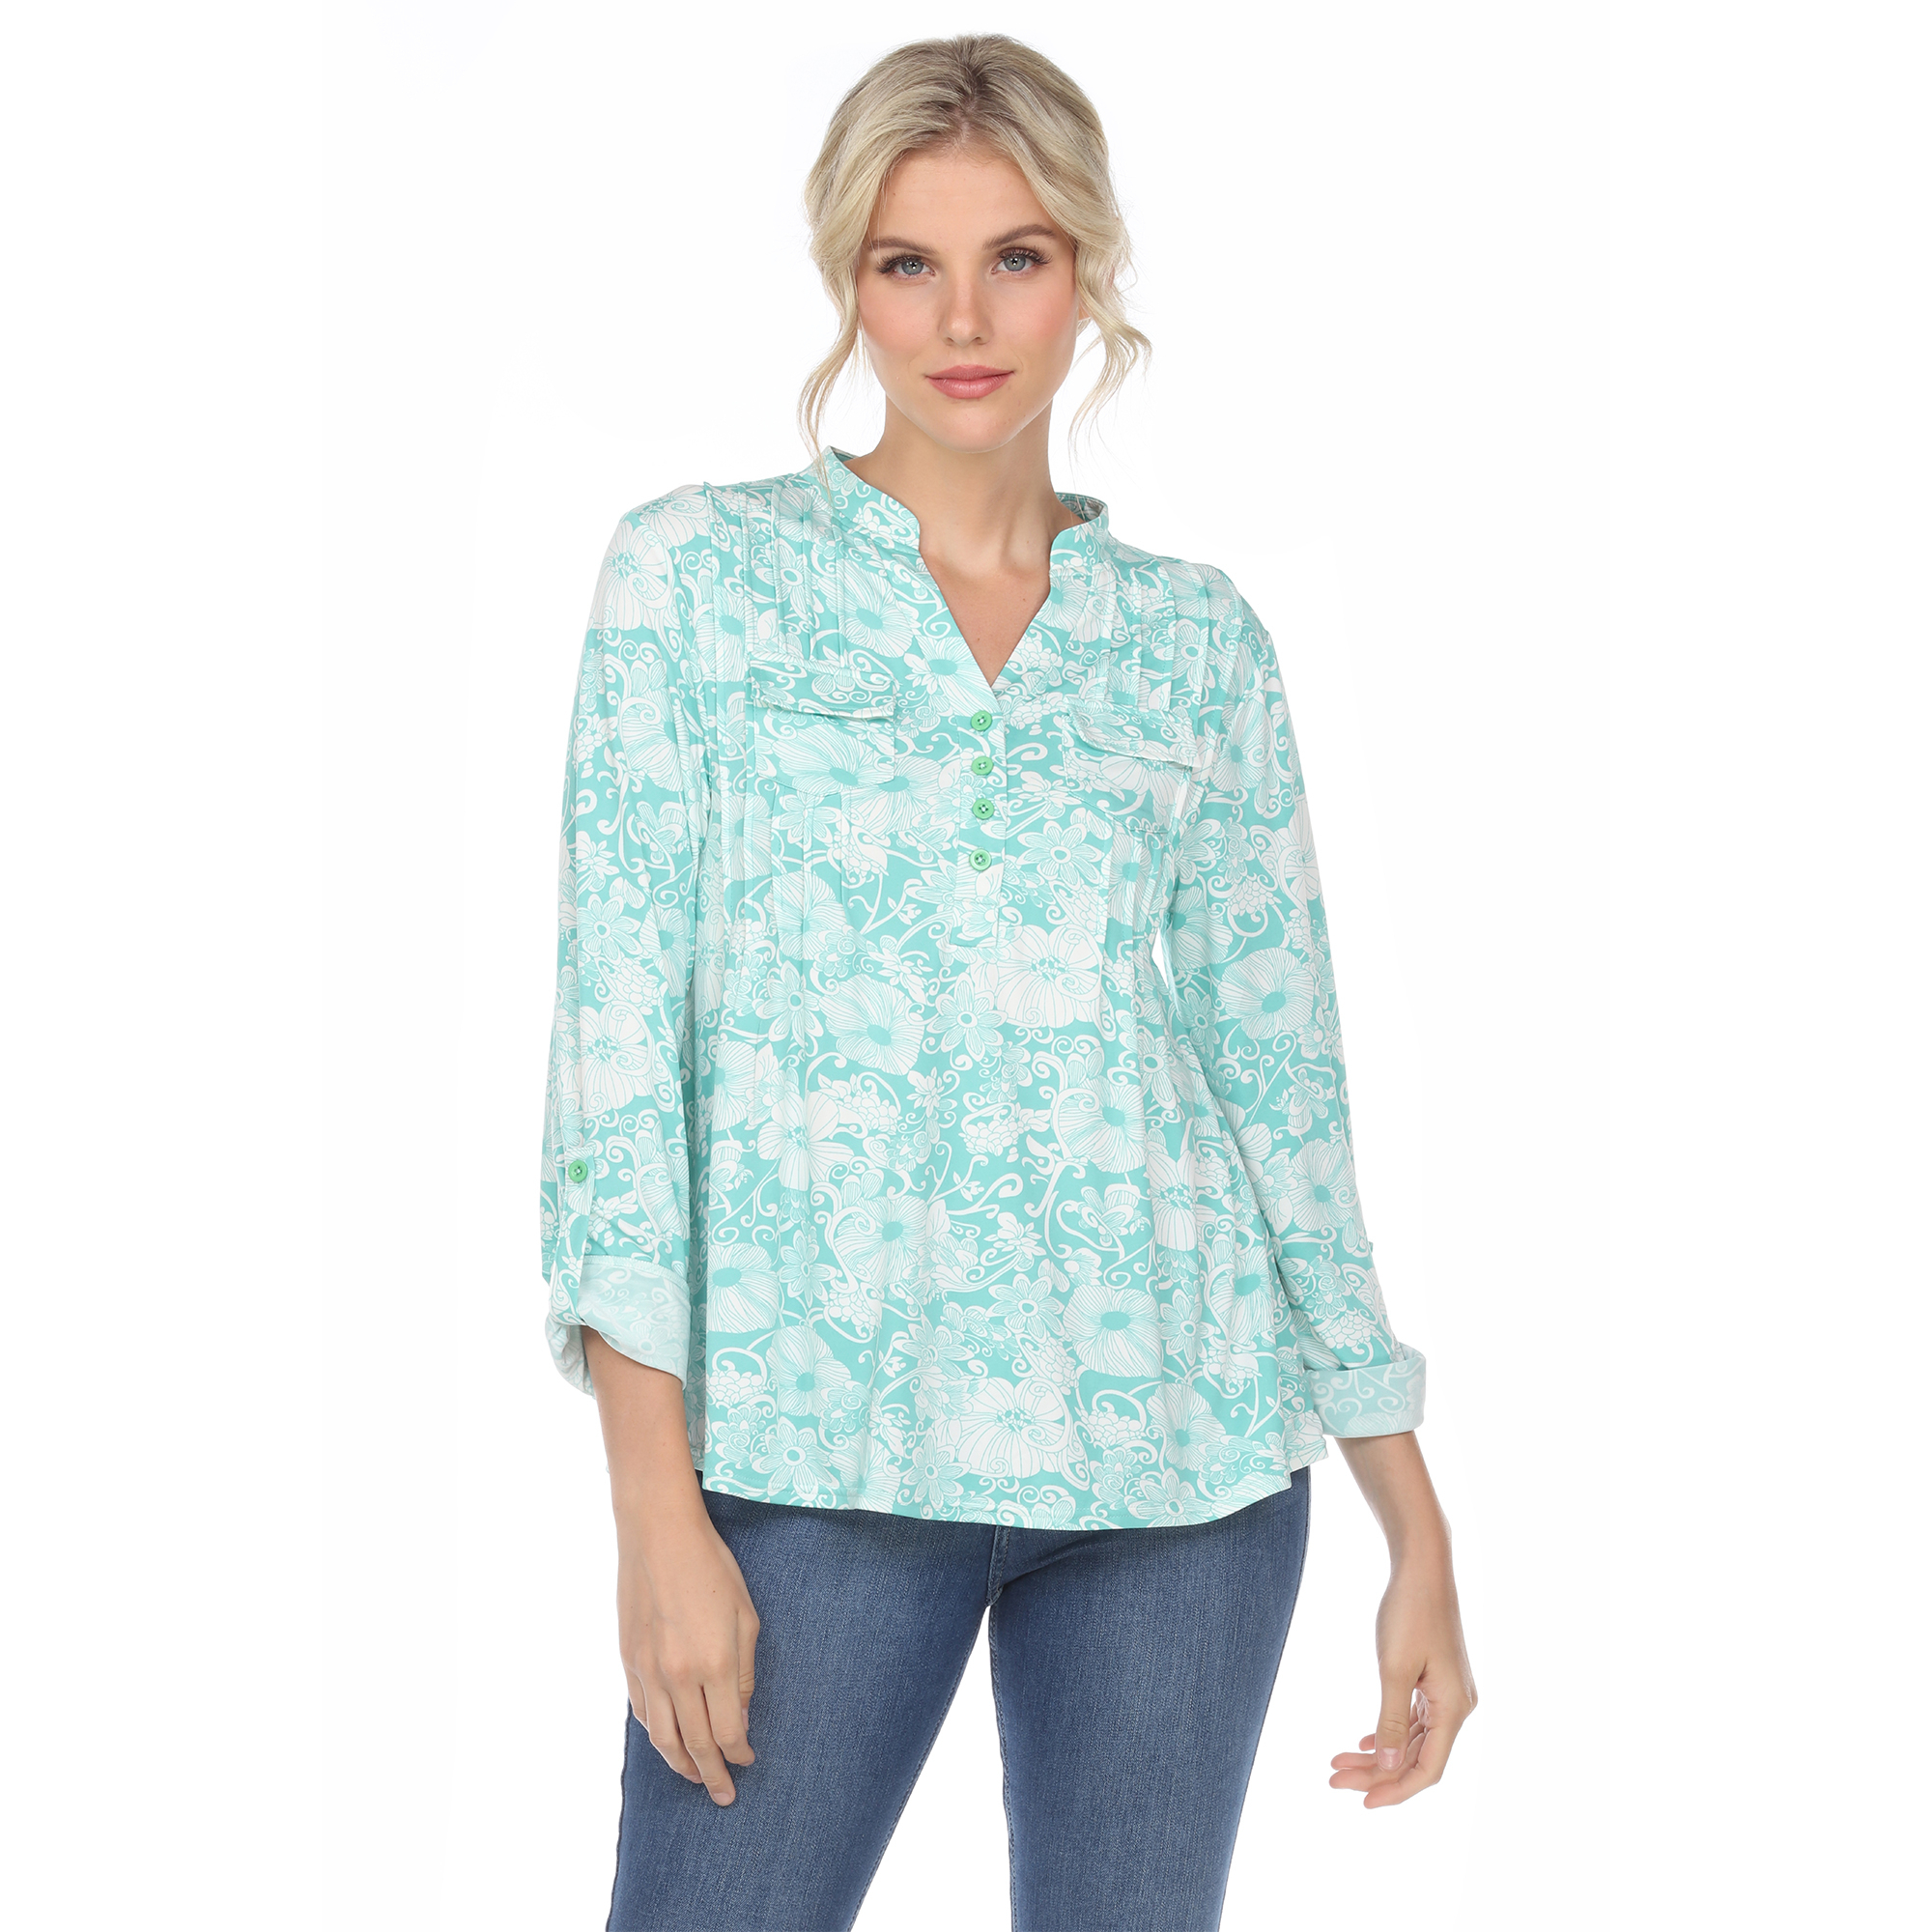 White Mark Women's Pleated Long Sleeve Floral Print Blouse - Mint, Small